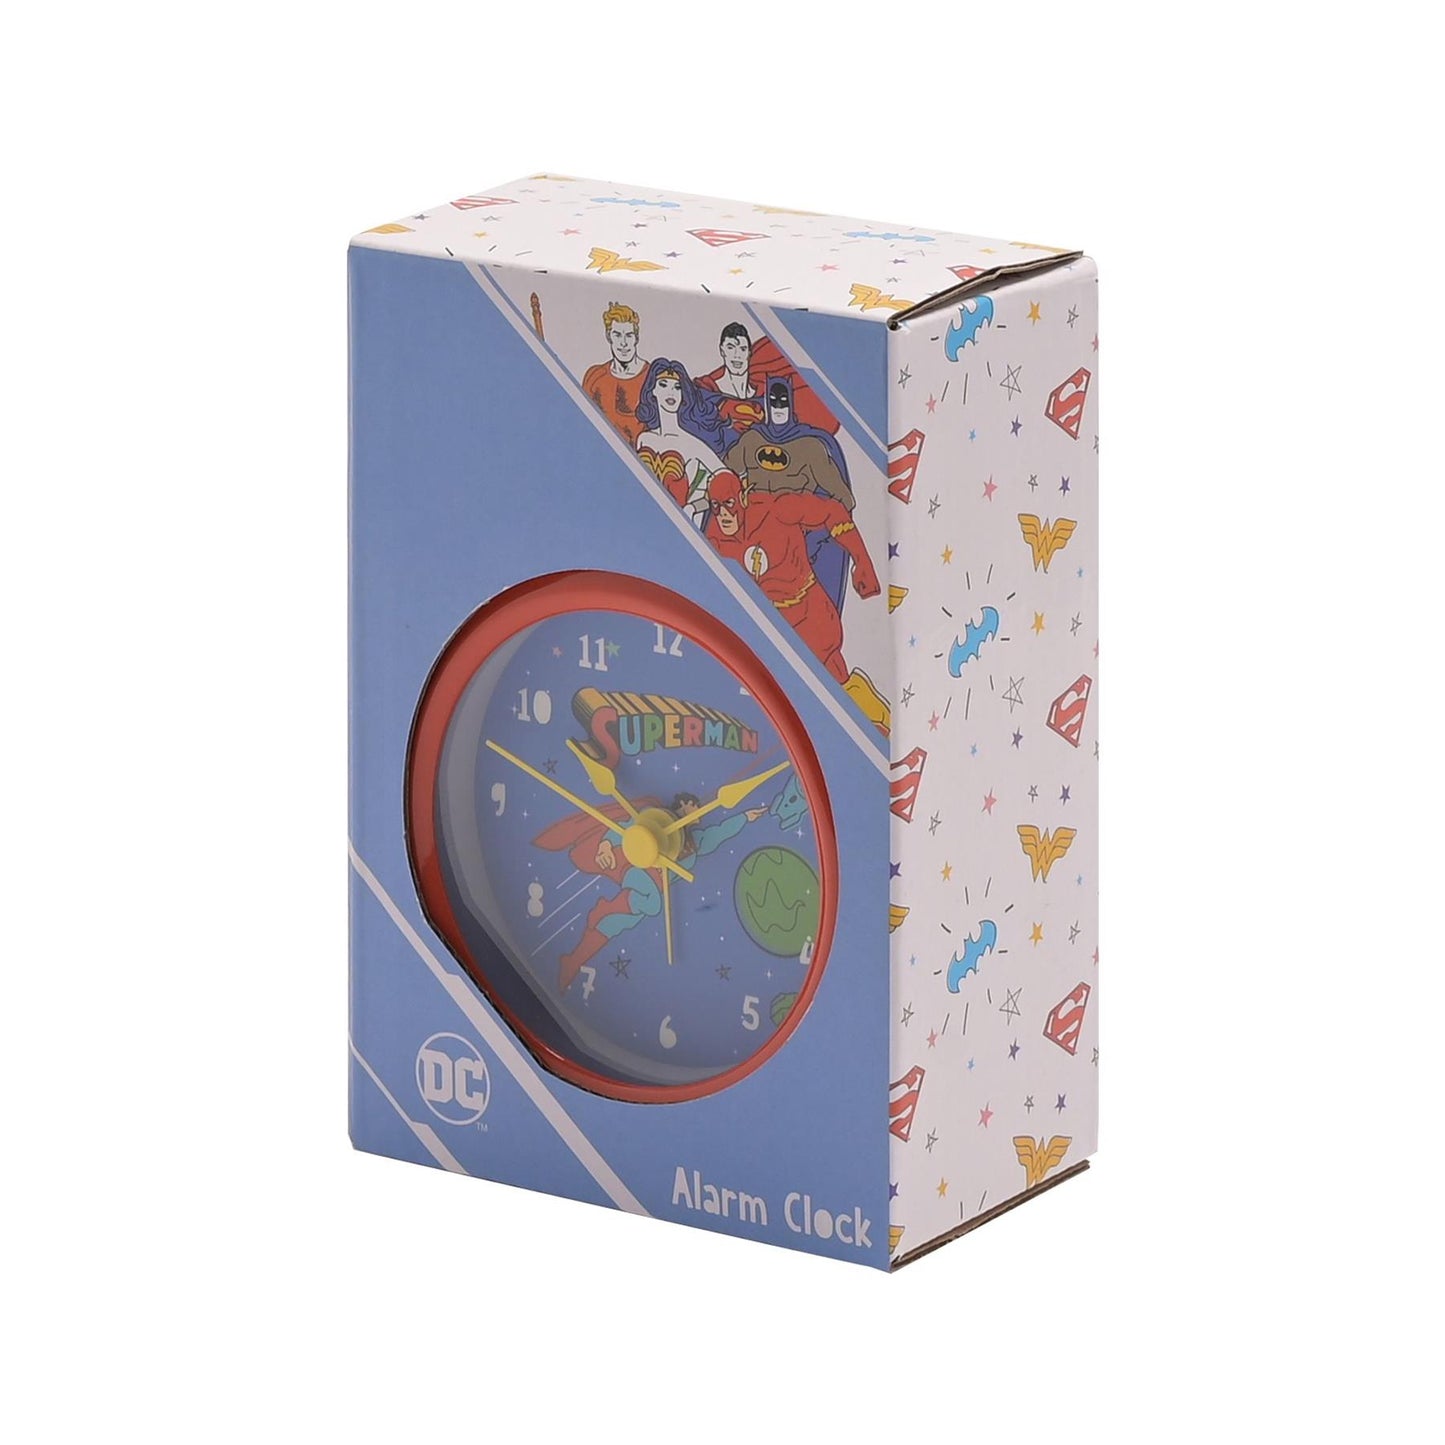 Wm.Widdop Childrens Bell Alarm Clock WB10 Available Multiple Colour